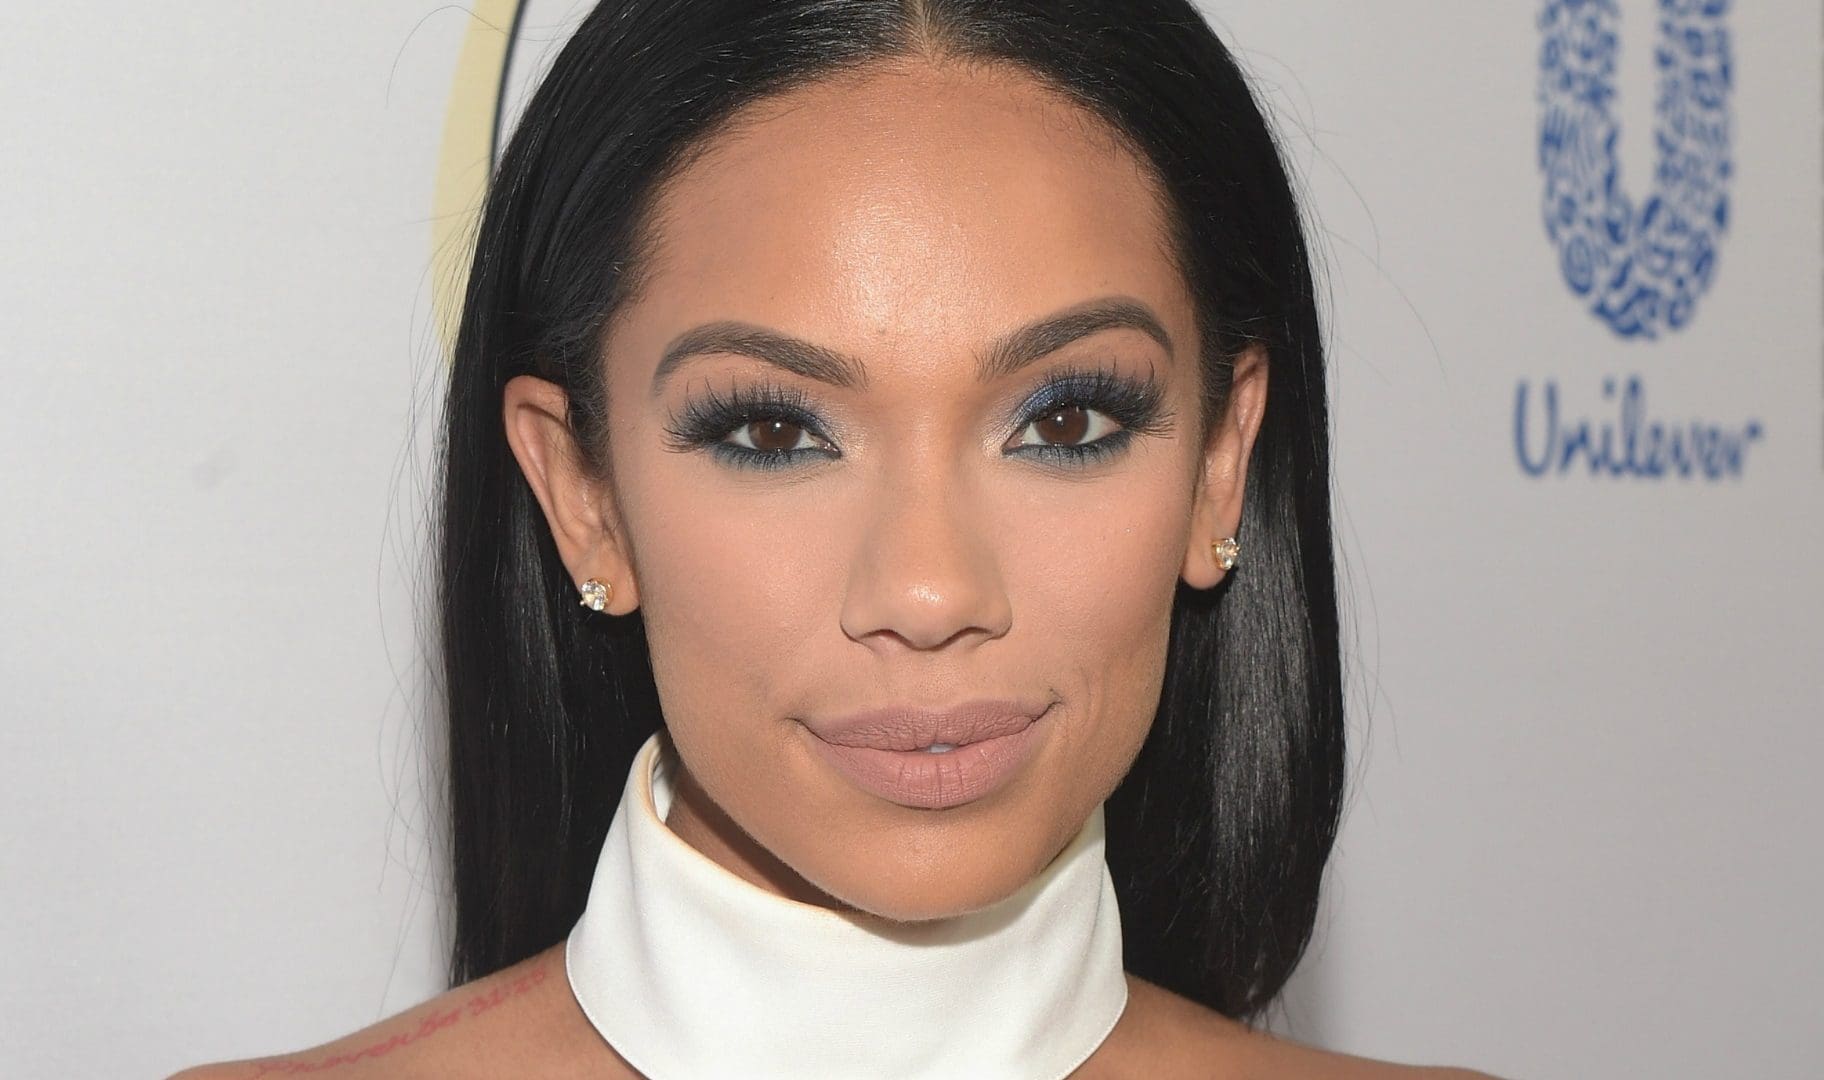 Erica Mena Uses Only Natural Products Since She Got Pregnant - Here's Her Latest Find